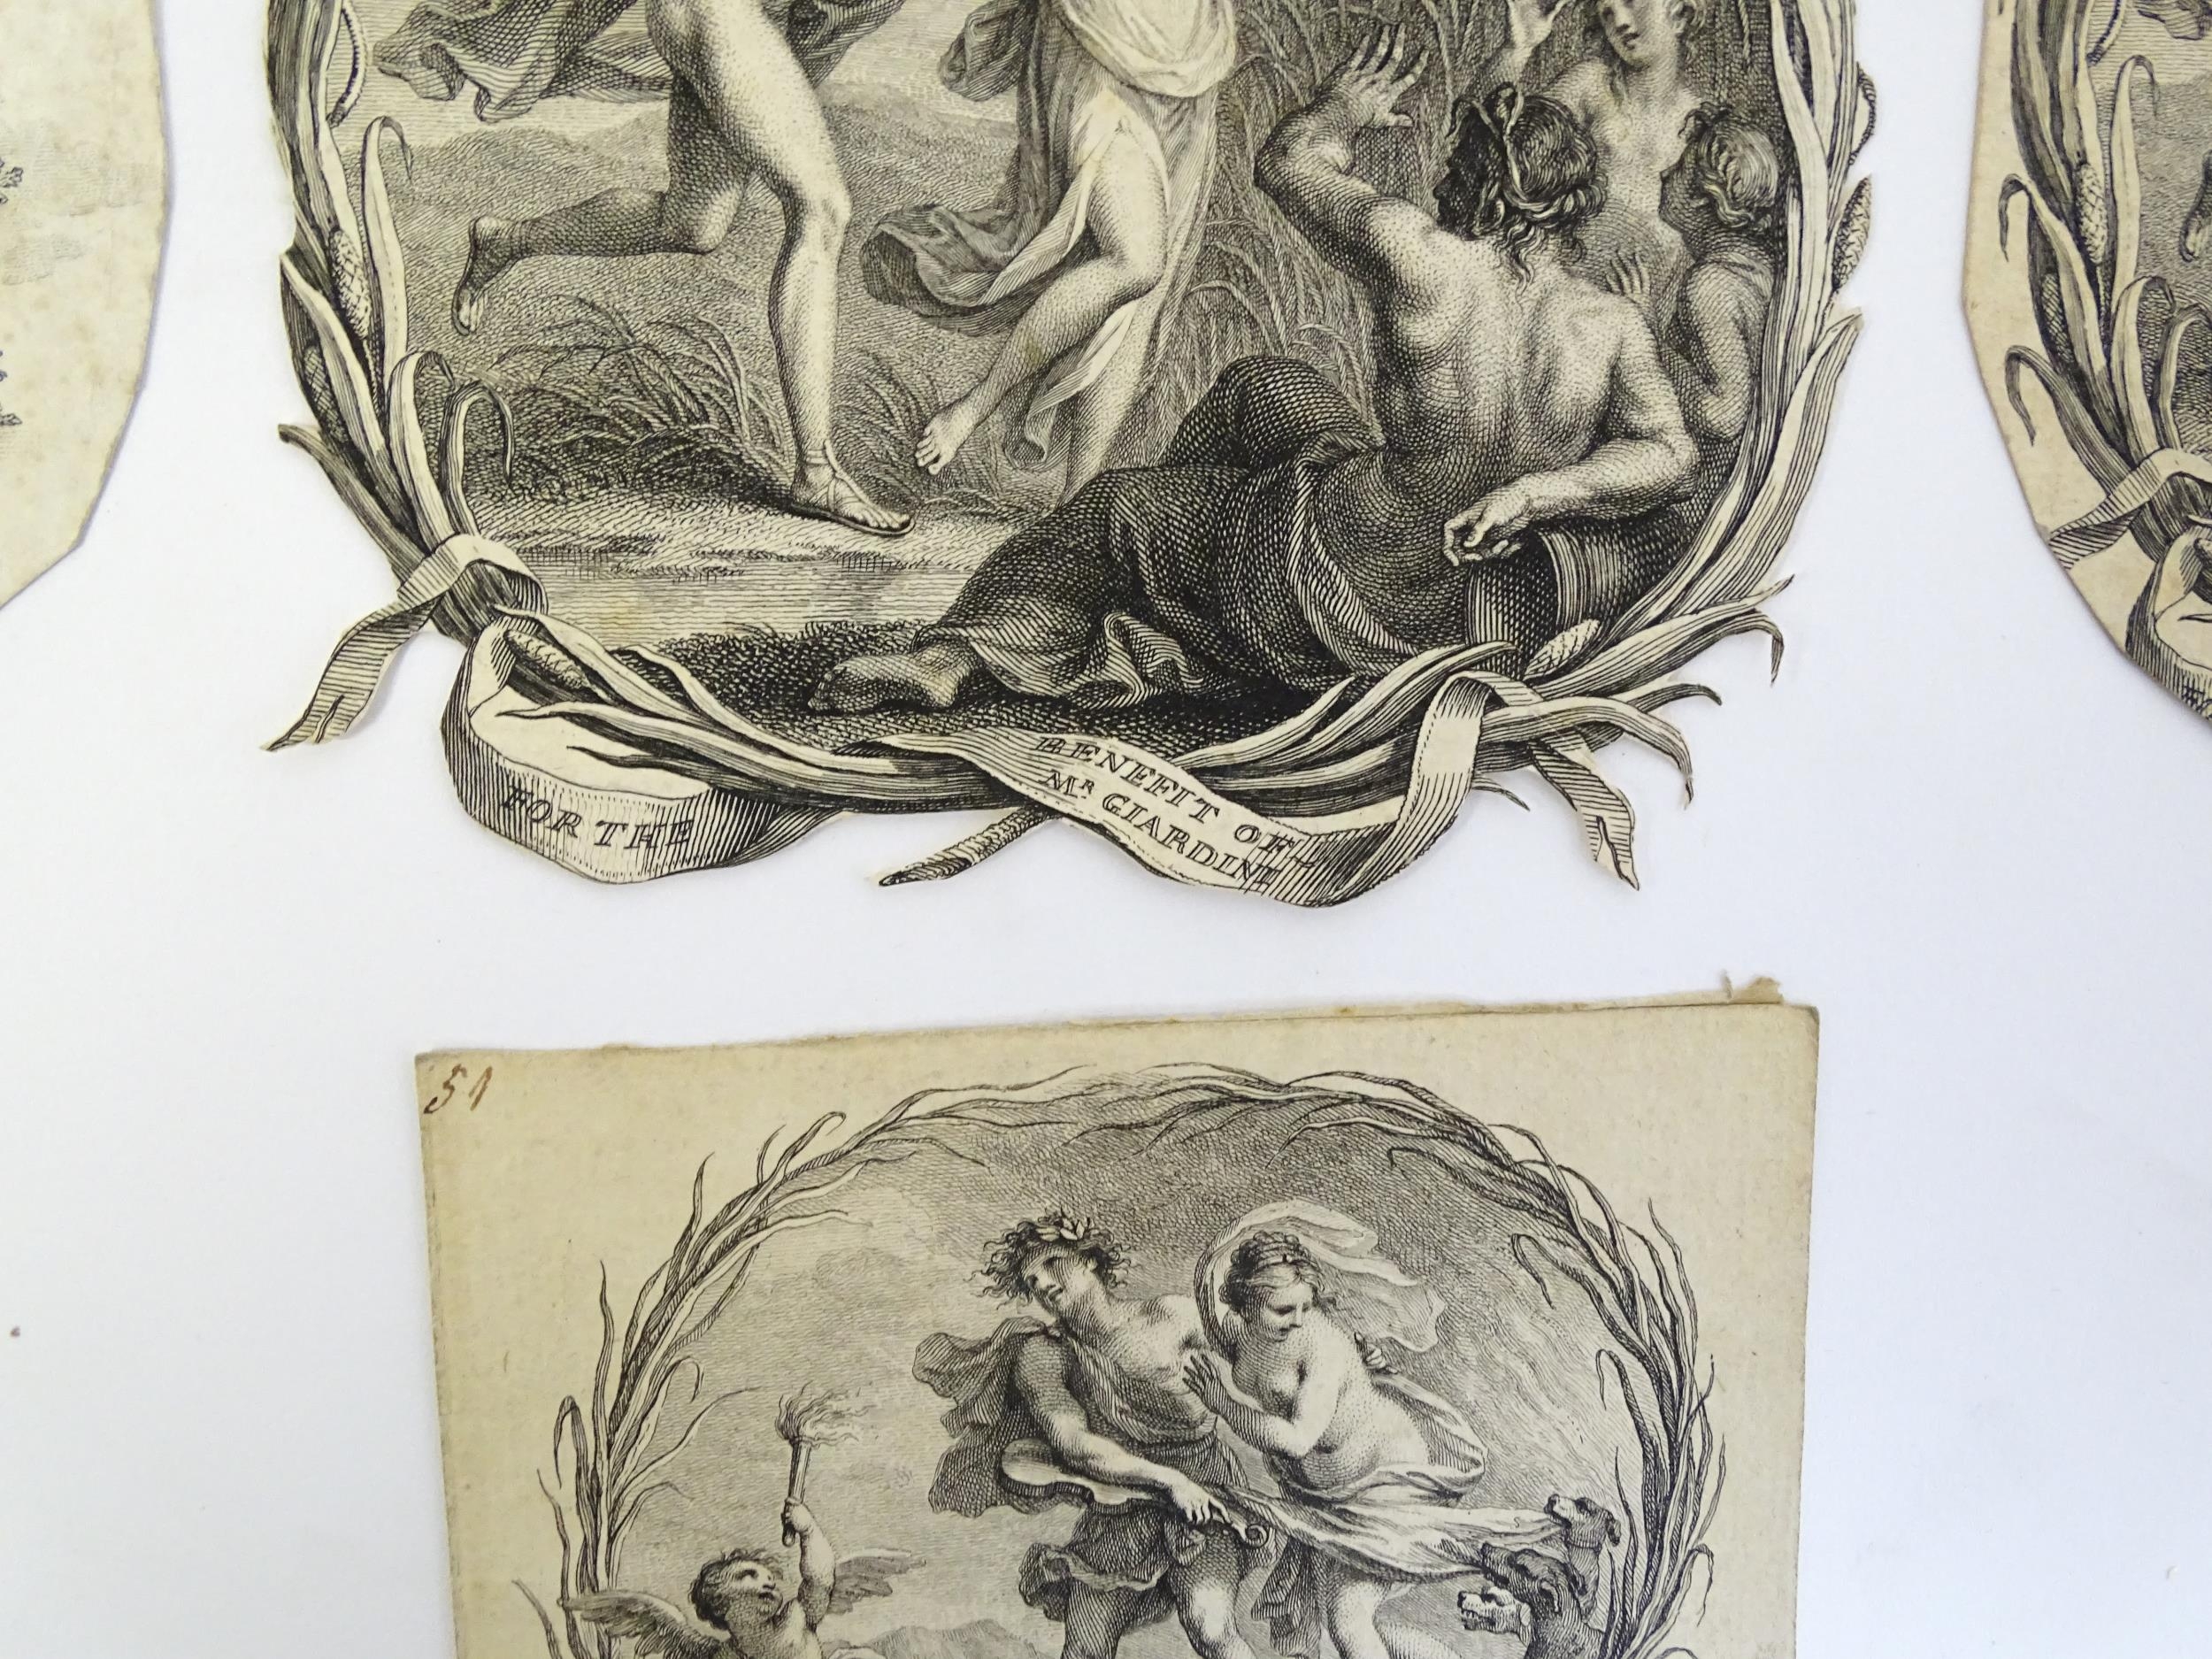 A quantity of 17th and 18thC Bartolozzi engravings to include Apollo & Daphne, Orpheus & Eurydice, - Image 7 of 11